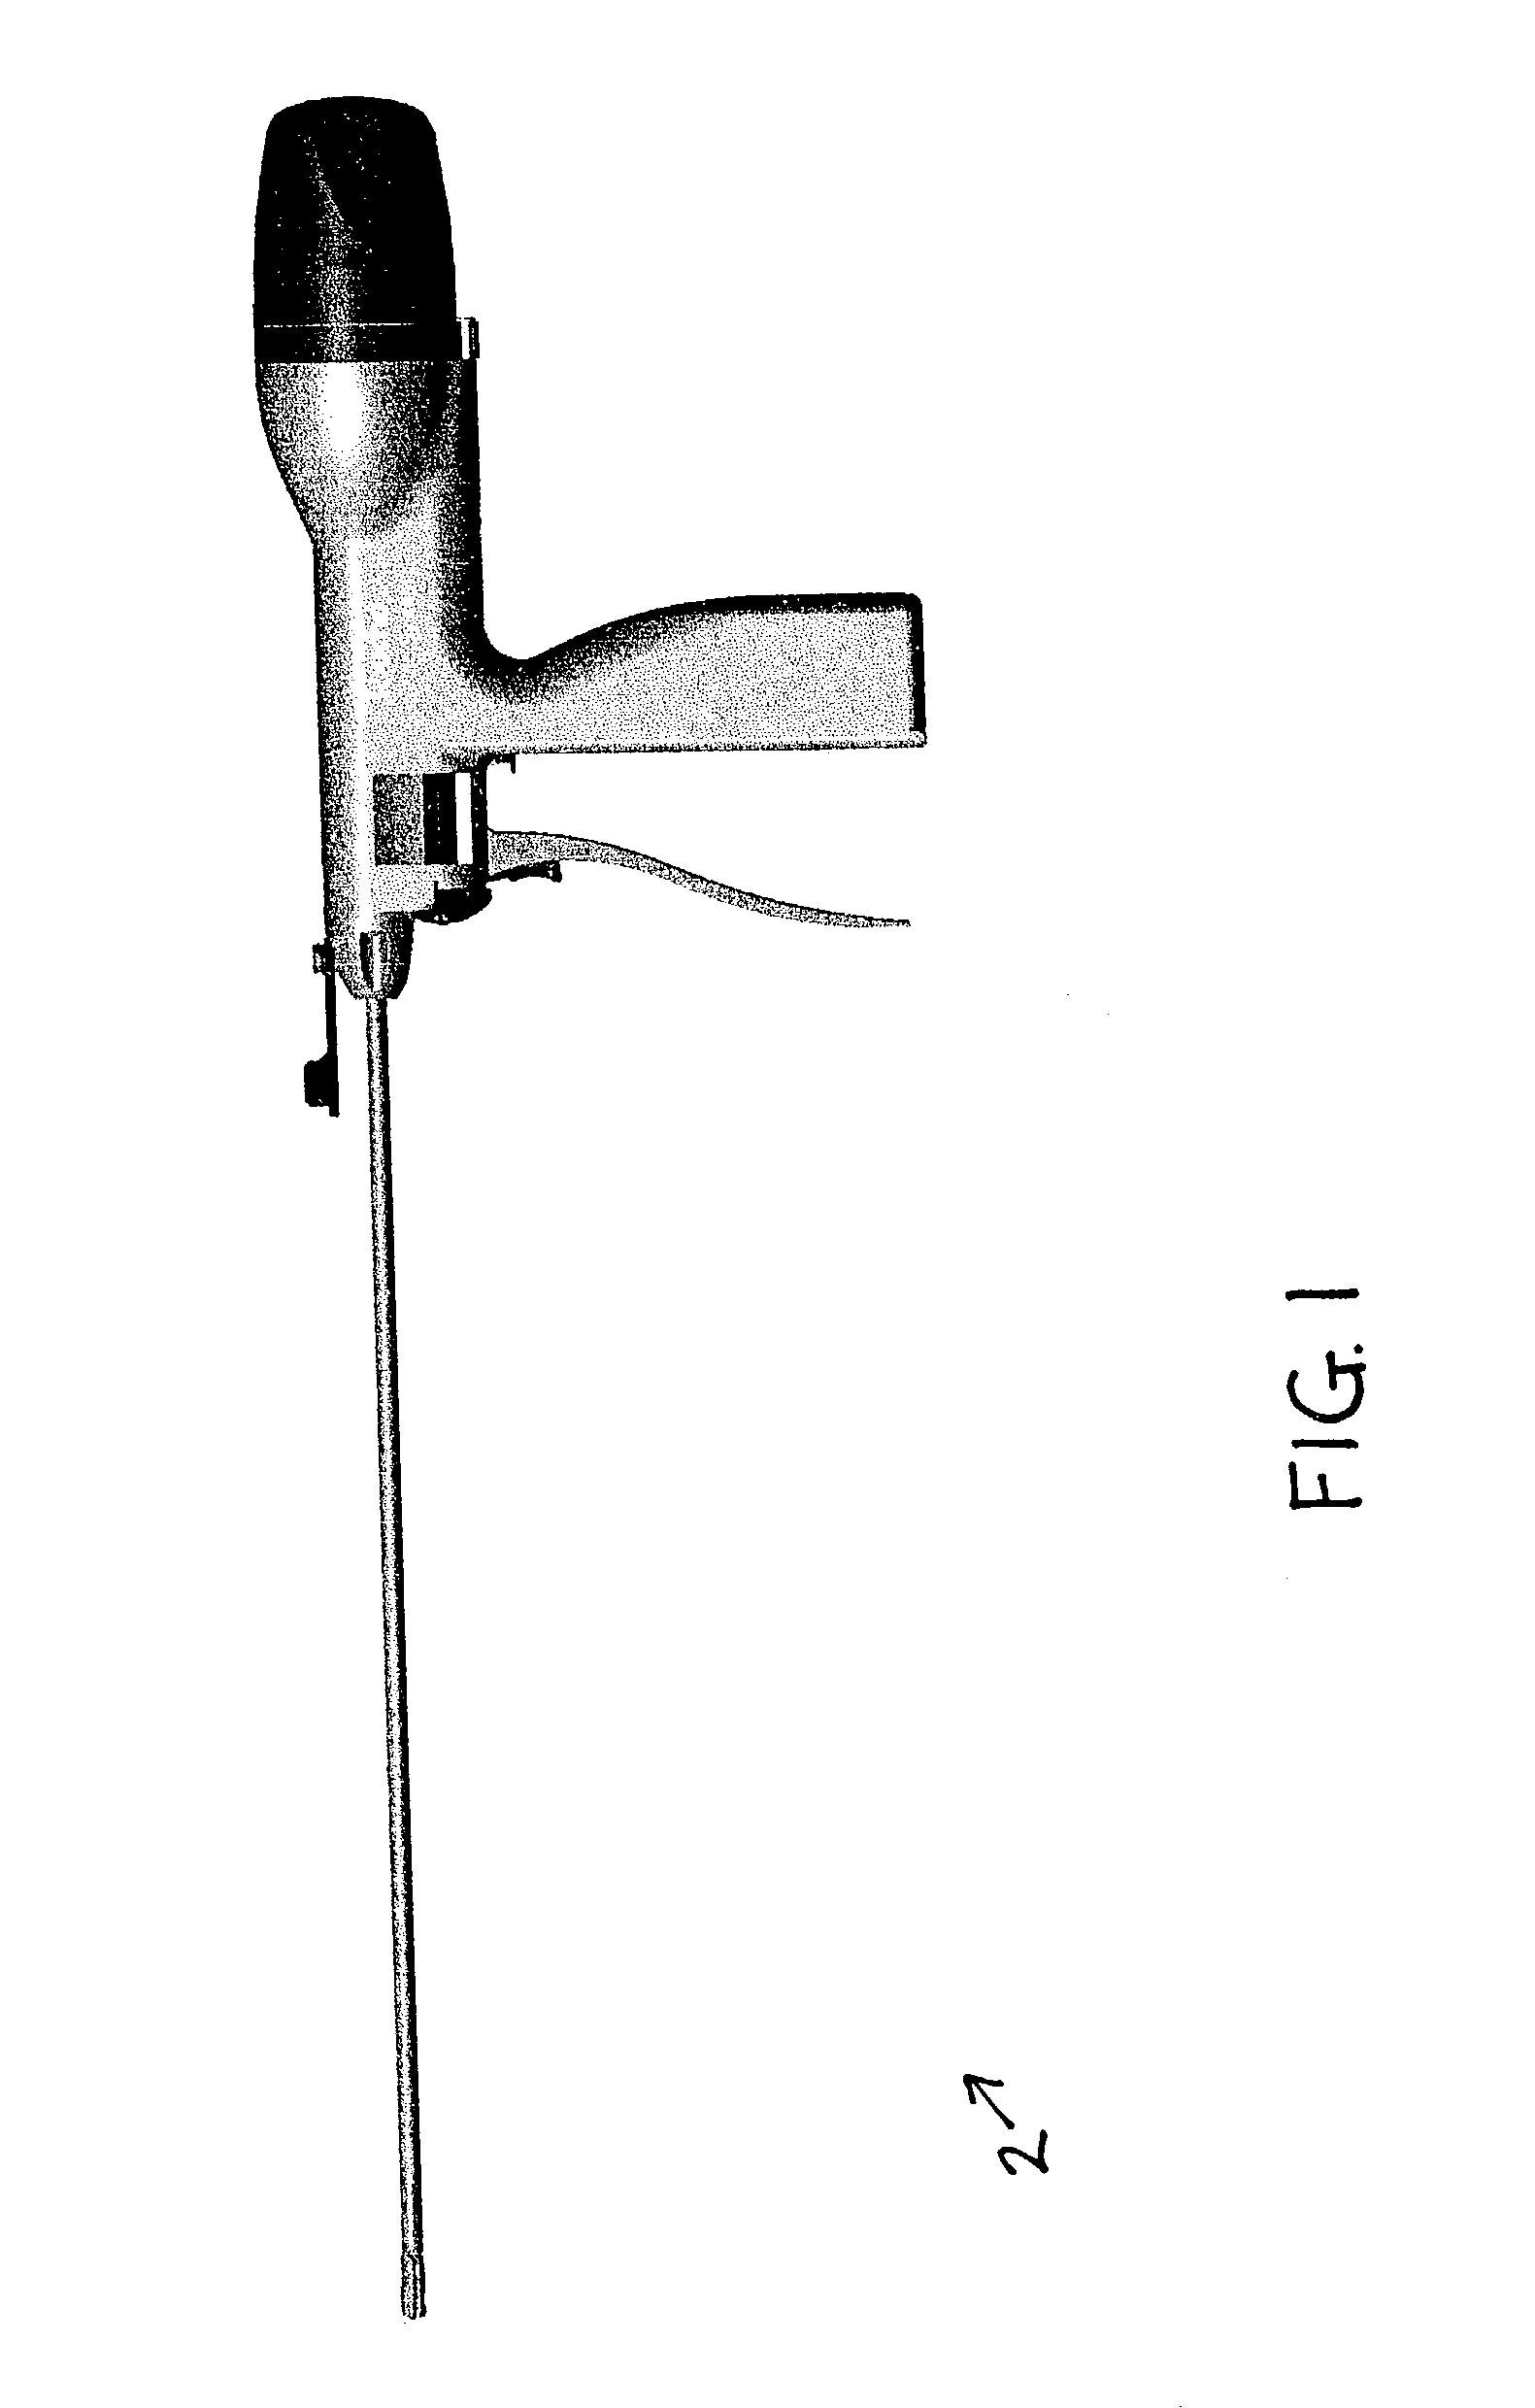 Surgical suturing instrument and method of use